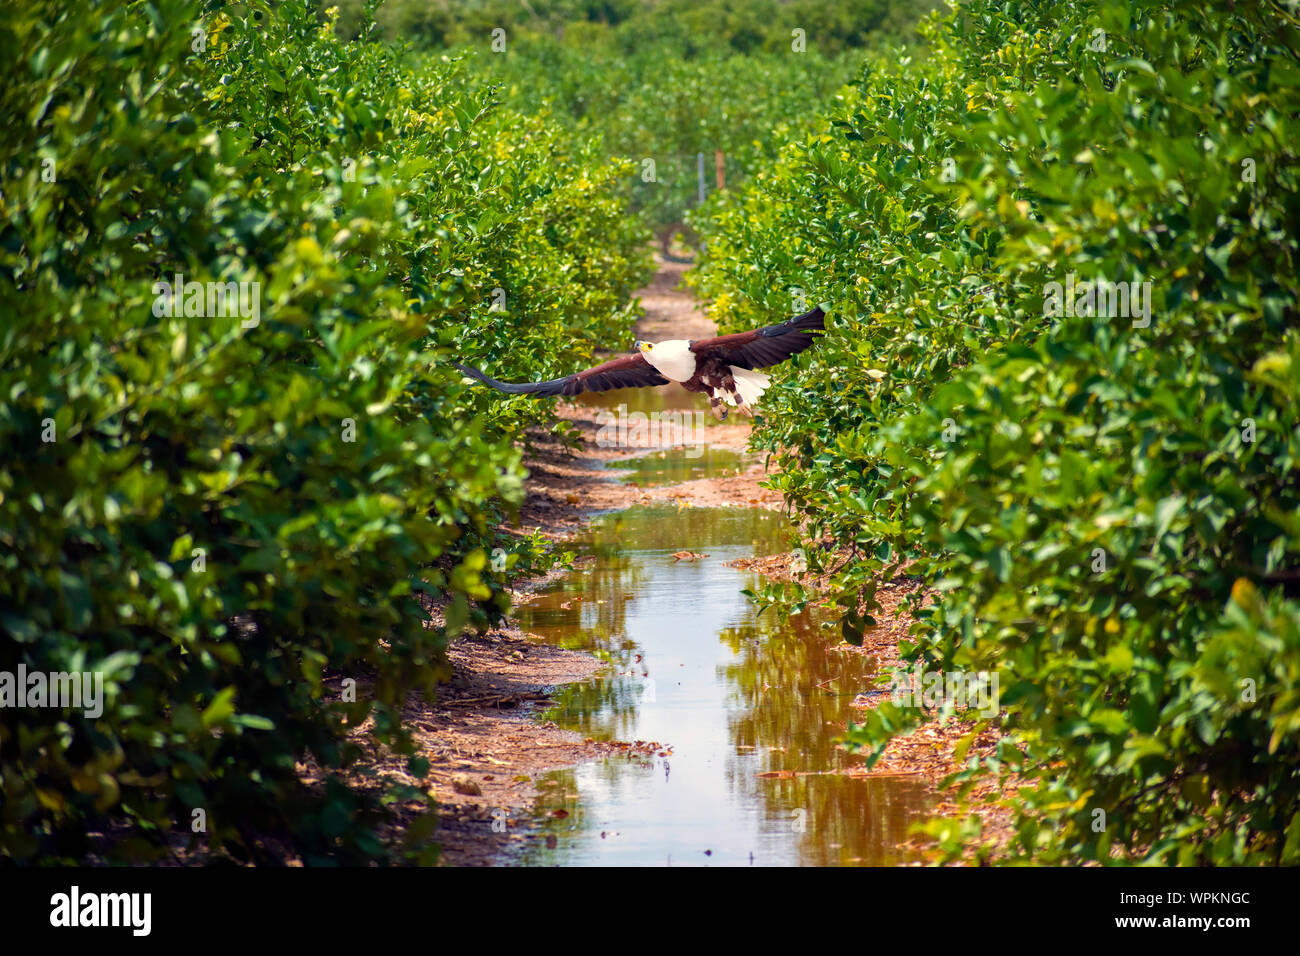 The African fish eagle also known as the African sea eagle or Haliaeetus vocifer, flying over lemon trees in Spain Stock Photo